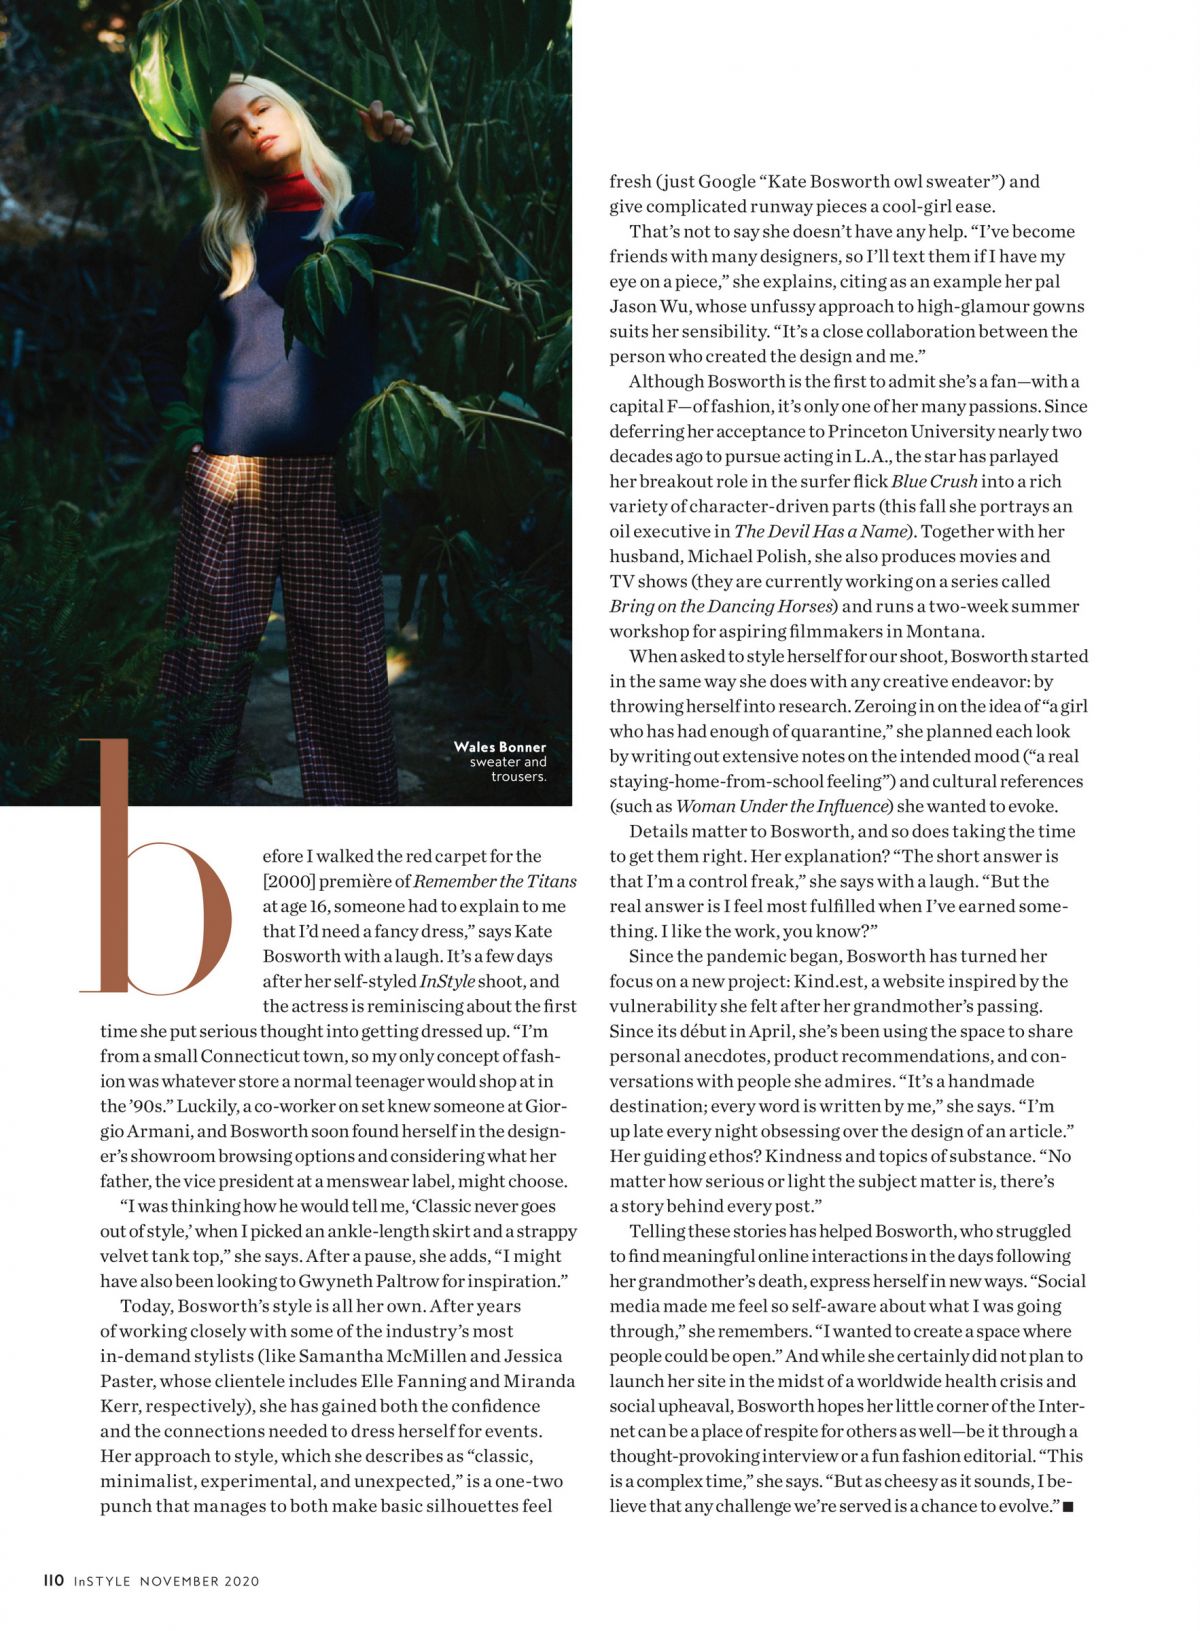 Kate Bosworth in Instyle Magazine, November 2020 Issue 2